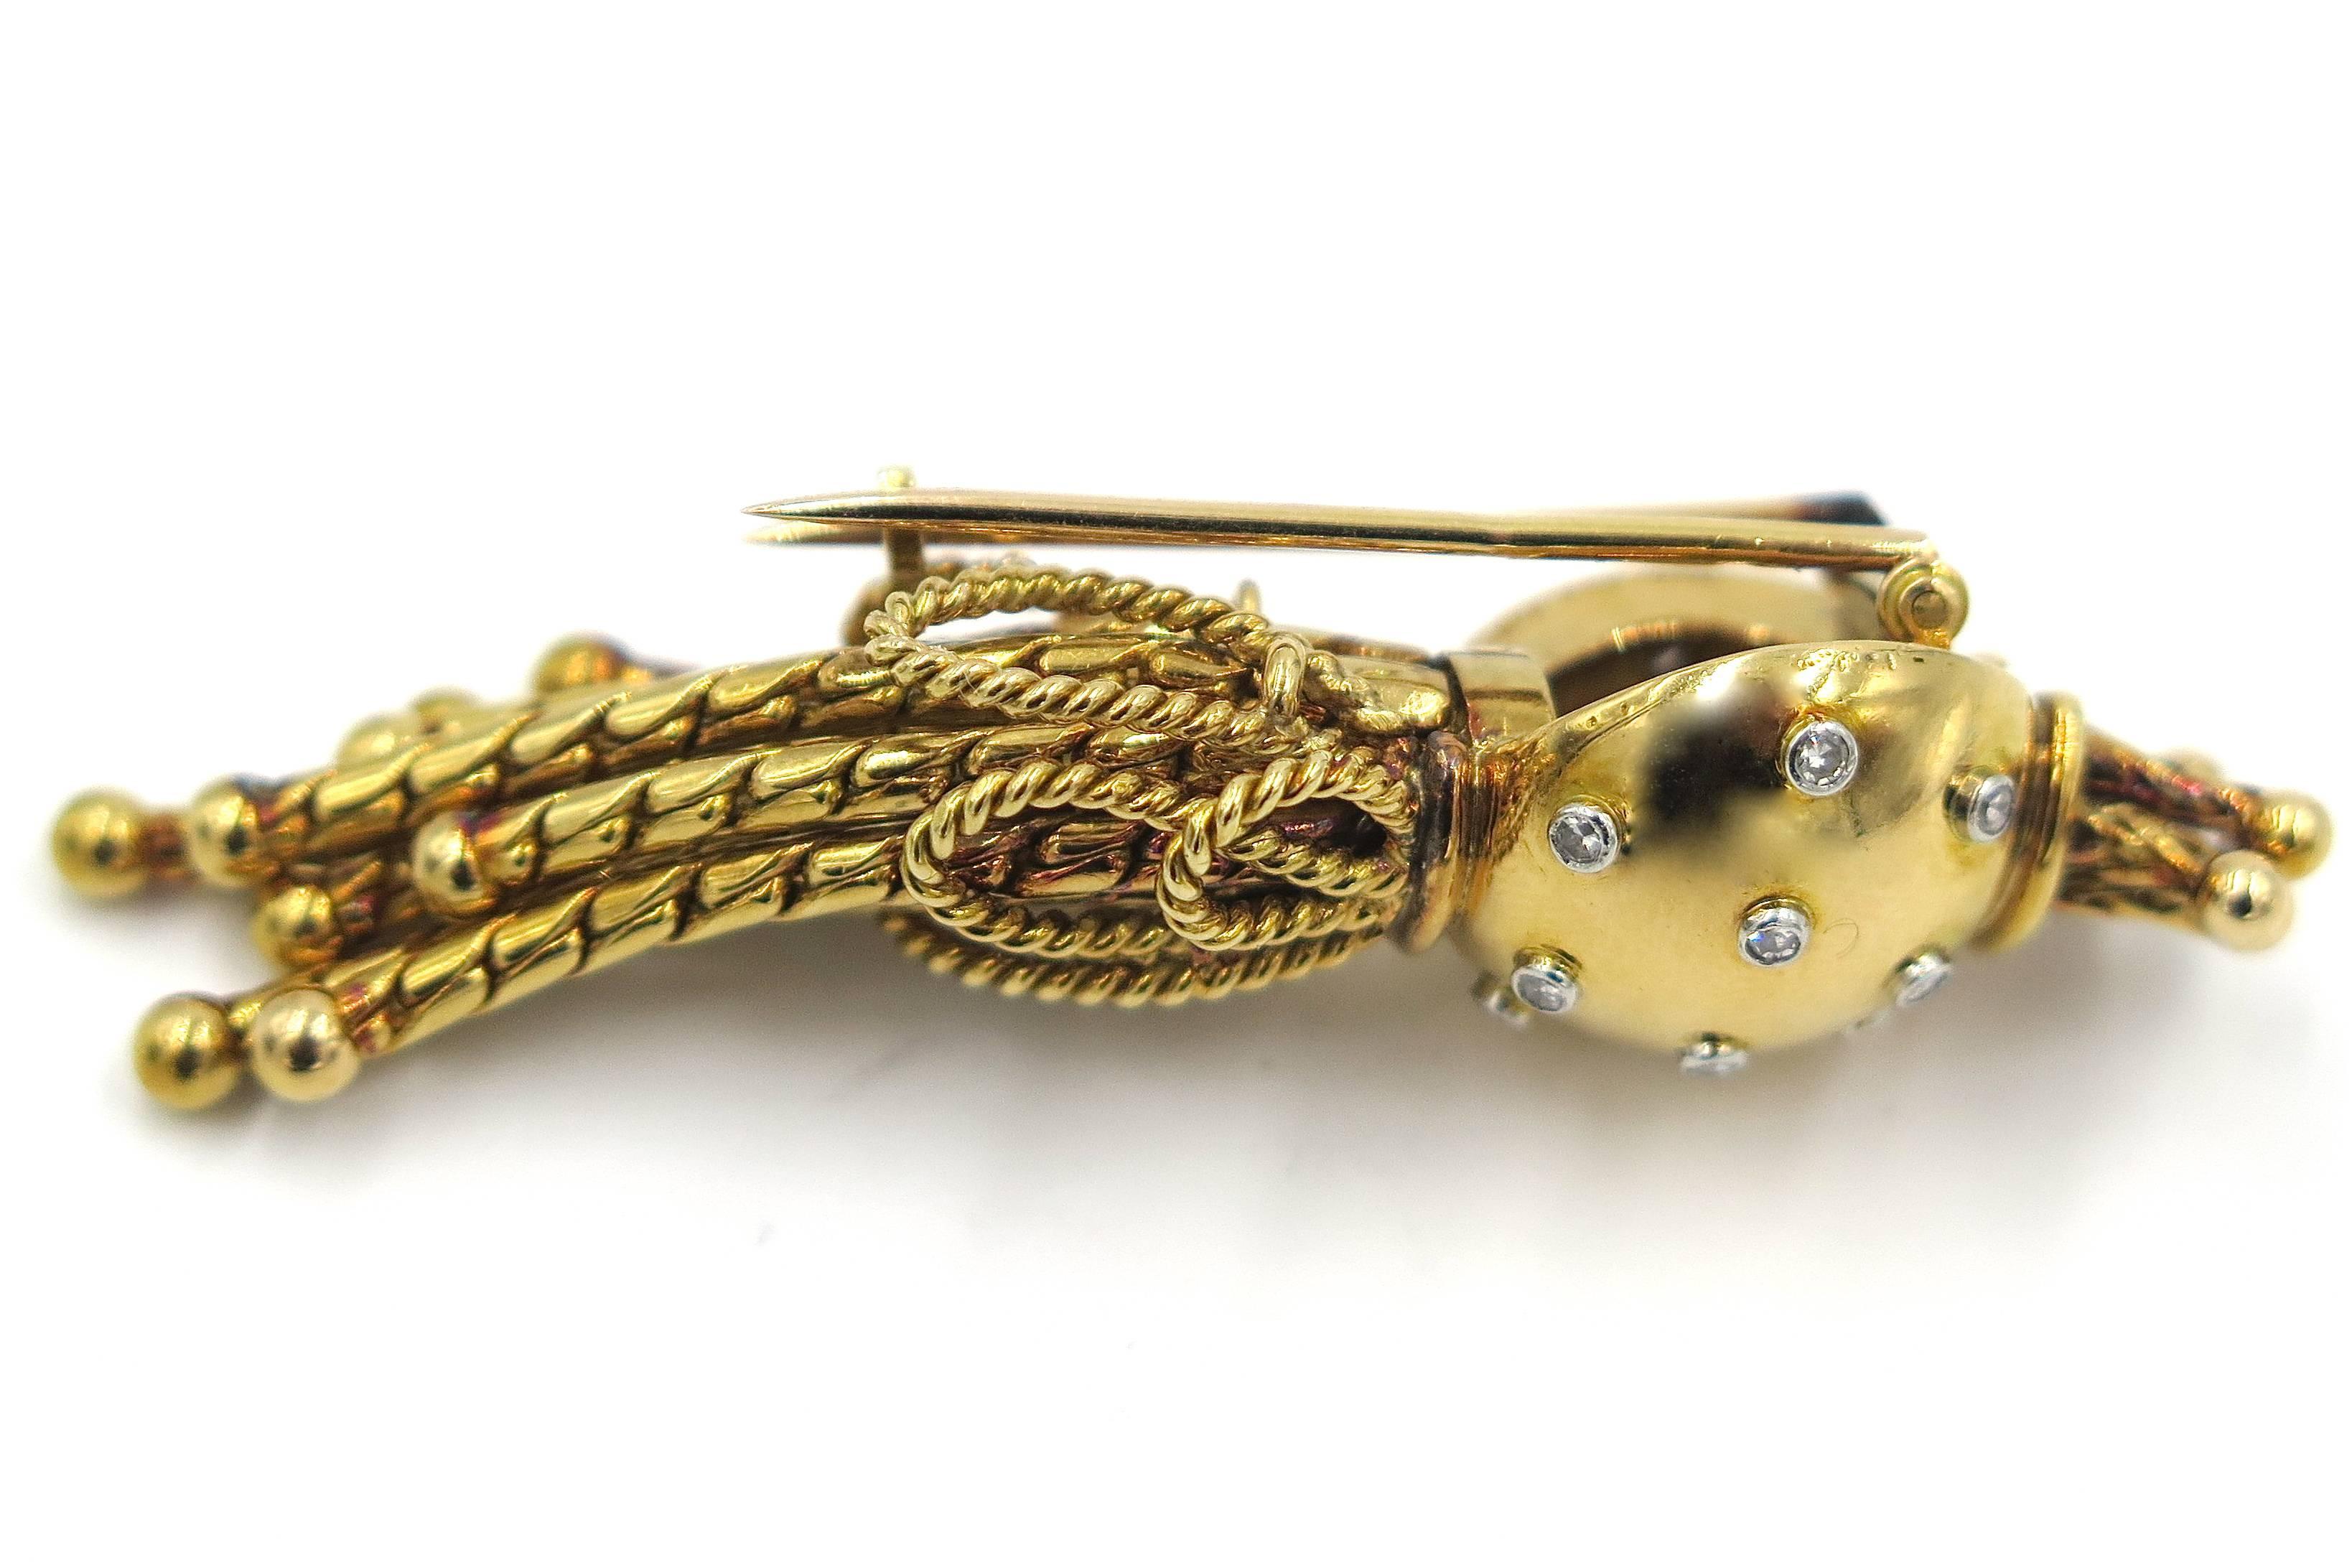 A French 18 karat yellow gold and diamond brooch, Marchak, Paris, Circa 1940s.  Signed Marchak Paris 23740 and hallmarked with French maker’s mark of RD and gold marks.  The brooch is designed with a polished dome at the top set with 16 collet set